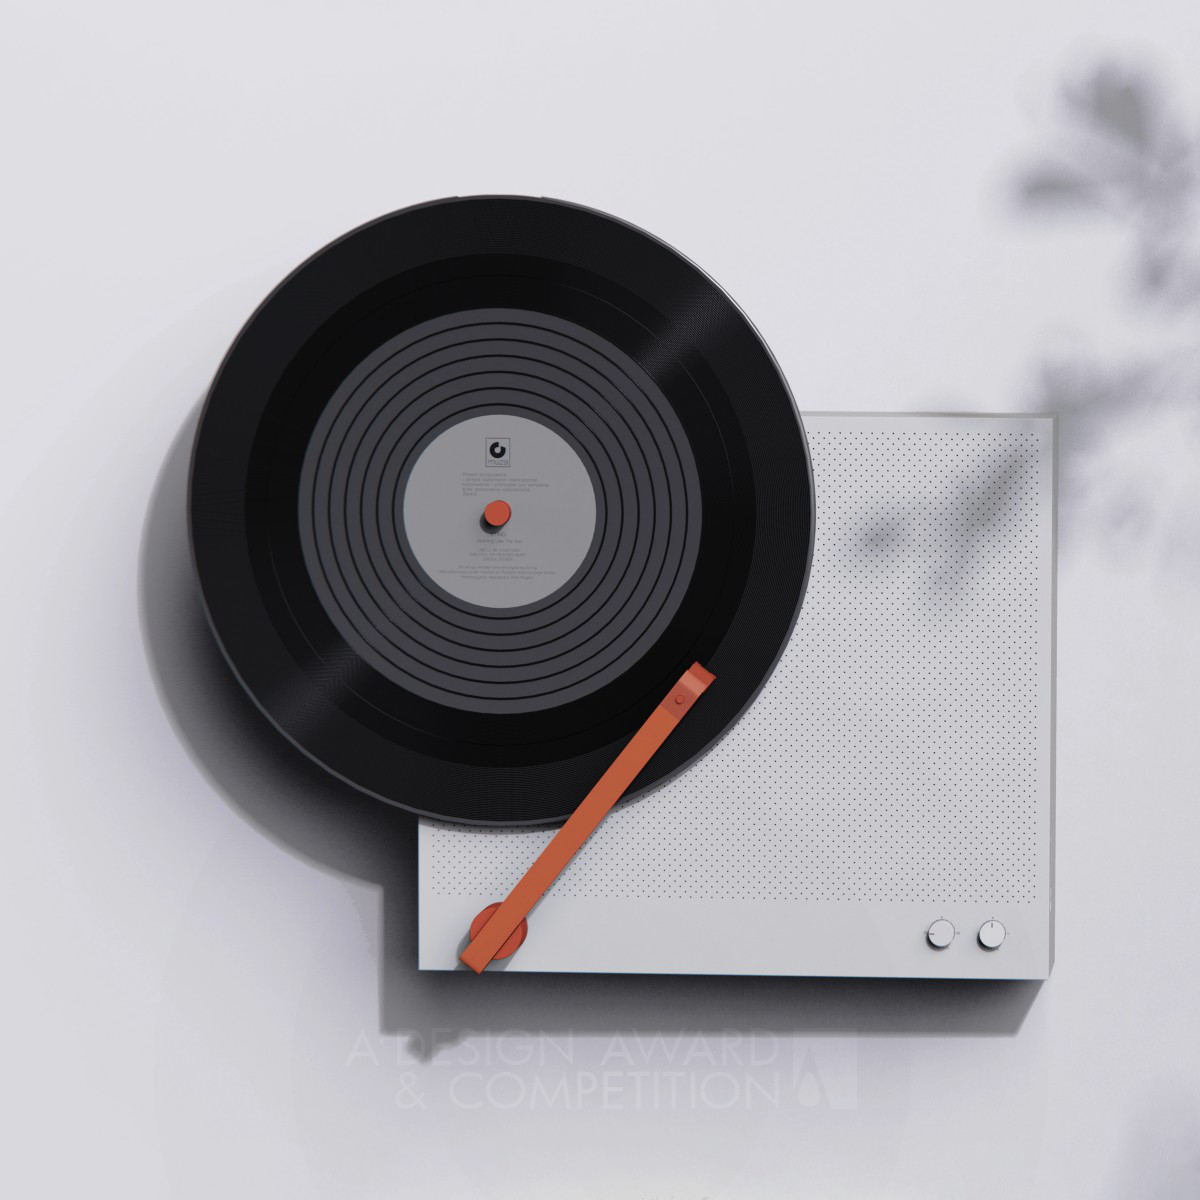 Shr d Music Player by Bruce Tao